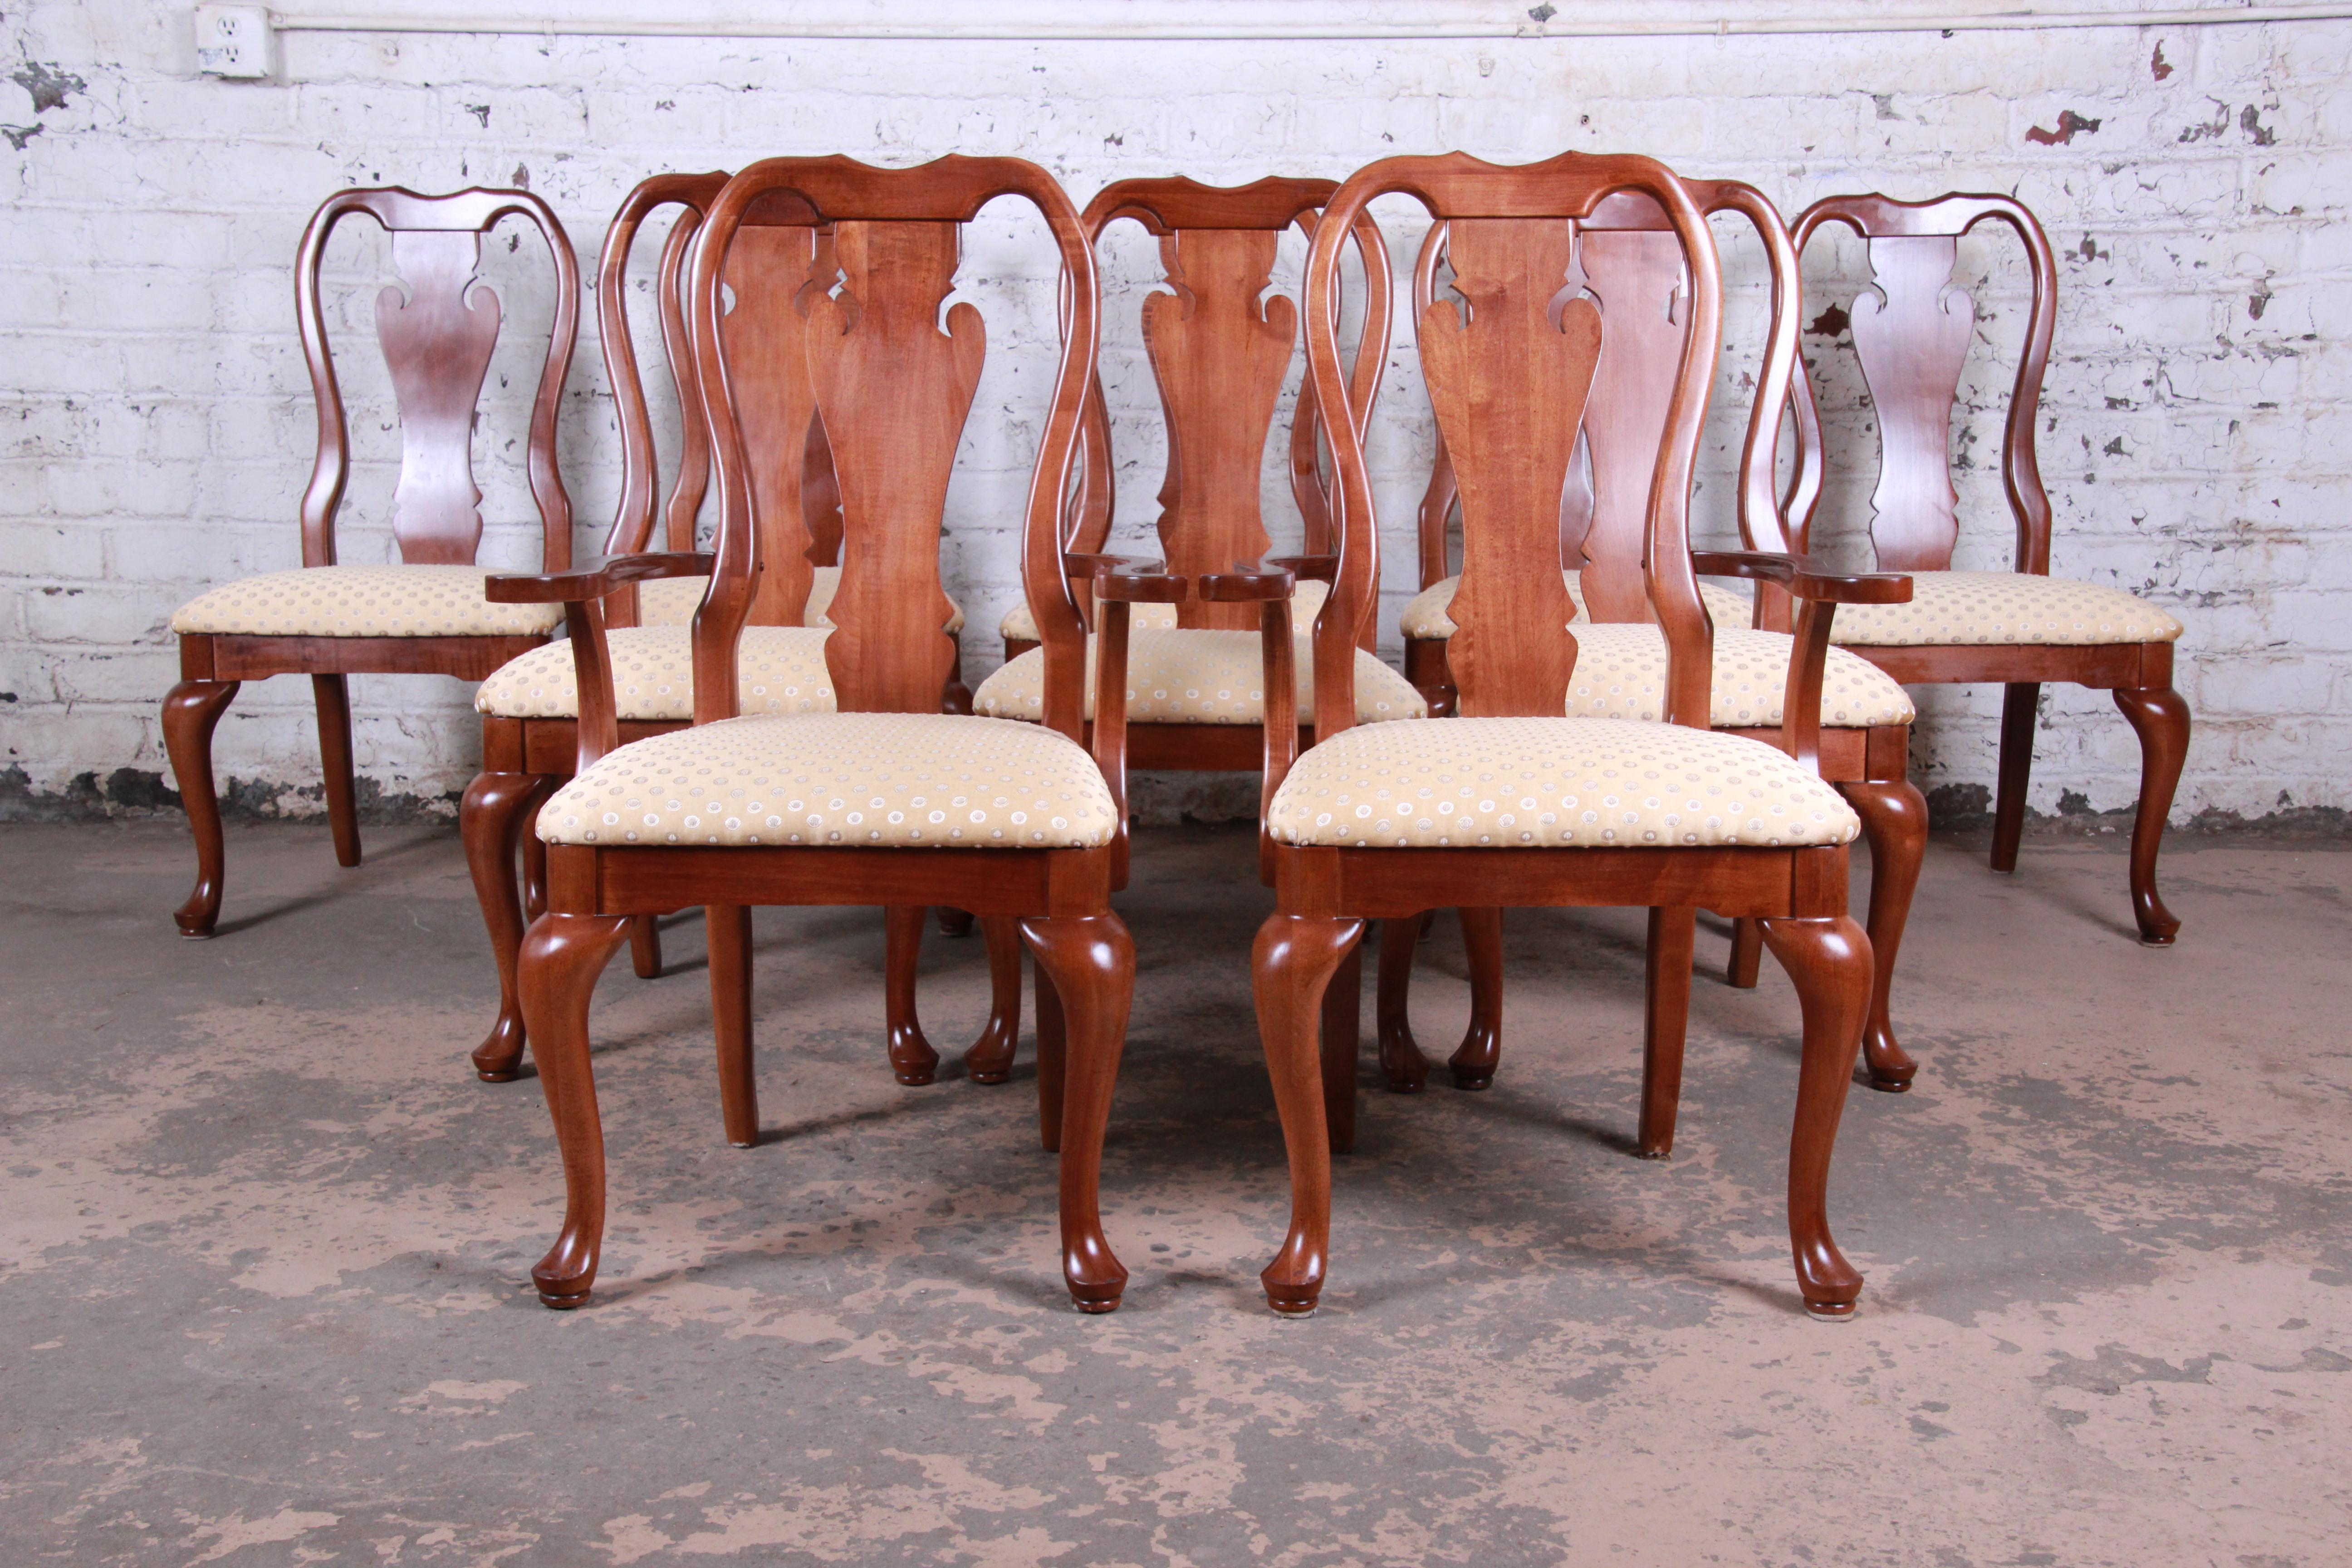 An outstanding set of ten mahogany Queen Anne style dining chairs. The set includes two armchairs and eight side chairs. The chairs feature solid mahogany frames and original gold upholstery in excellent condition. They were procured with the